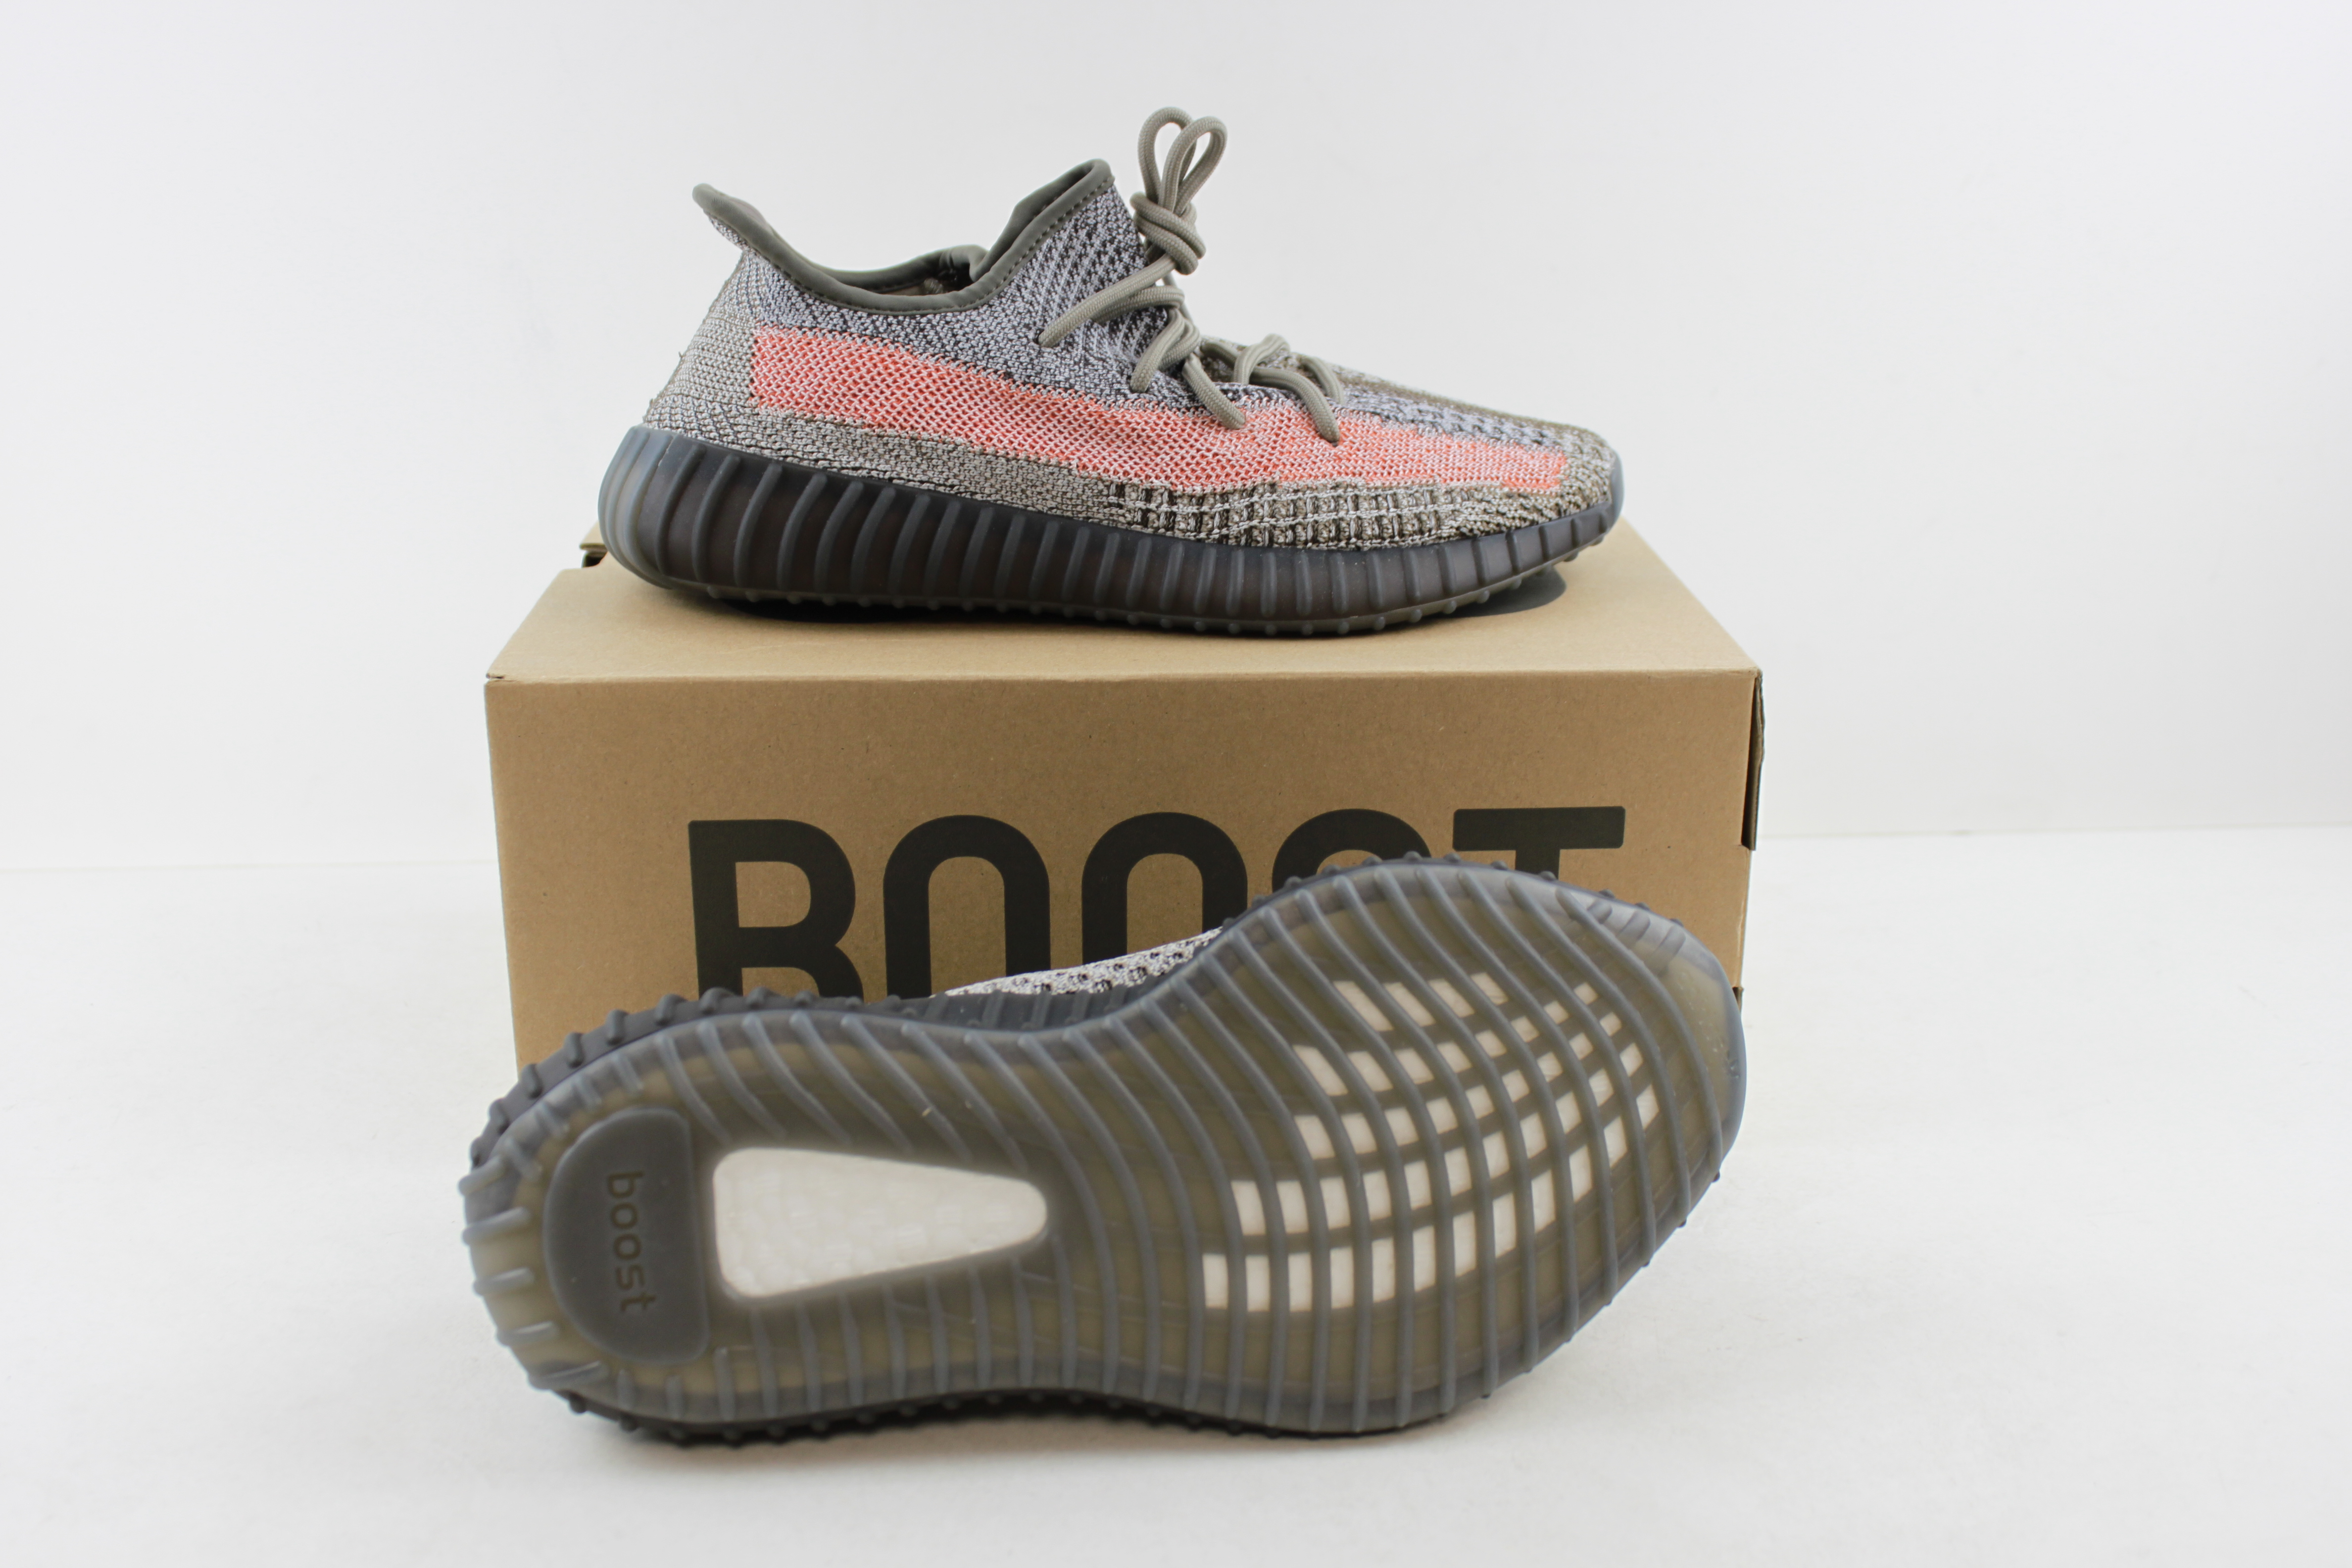 Adidas Men's Yeezy Boost 350 V2 Trainers, Ash Stone, UK 7.5 - Image 2 of 4